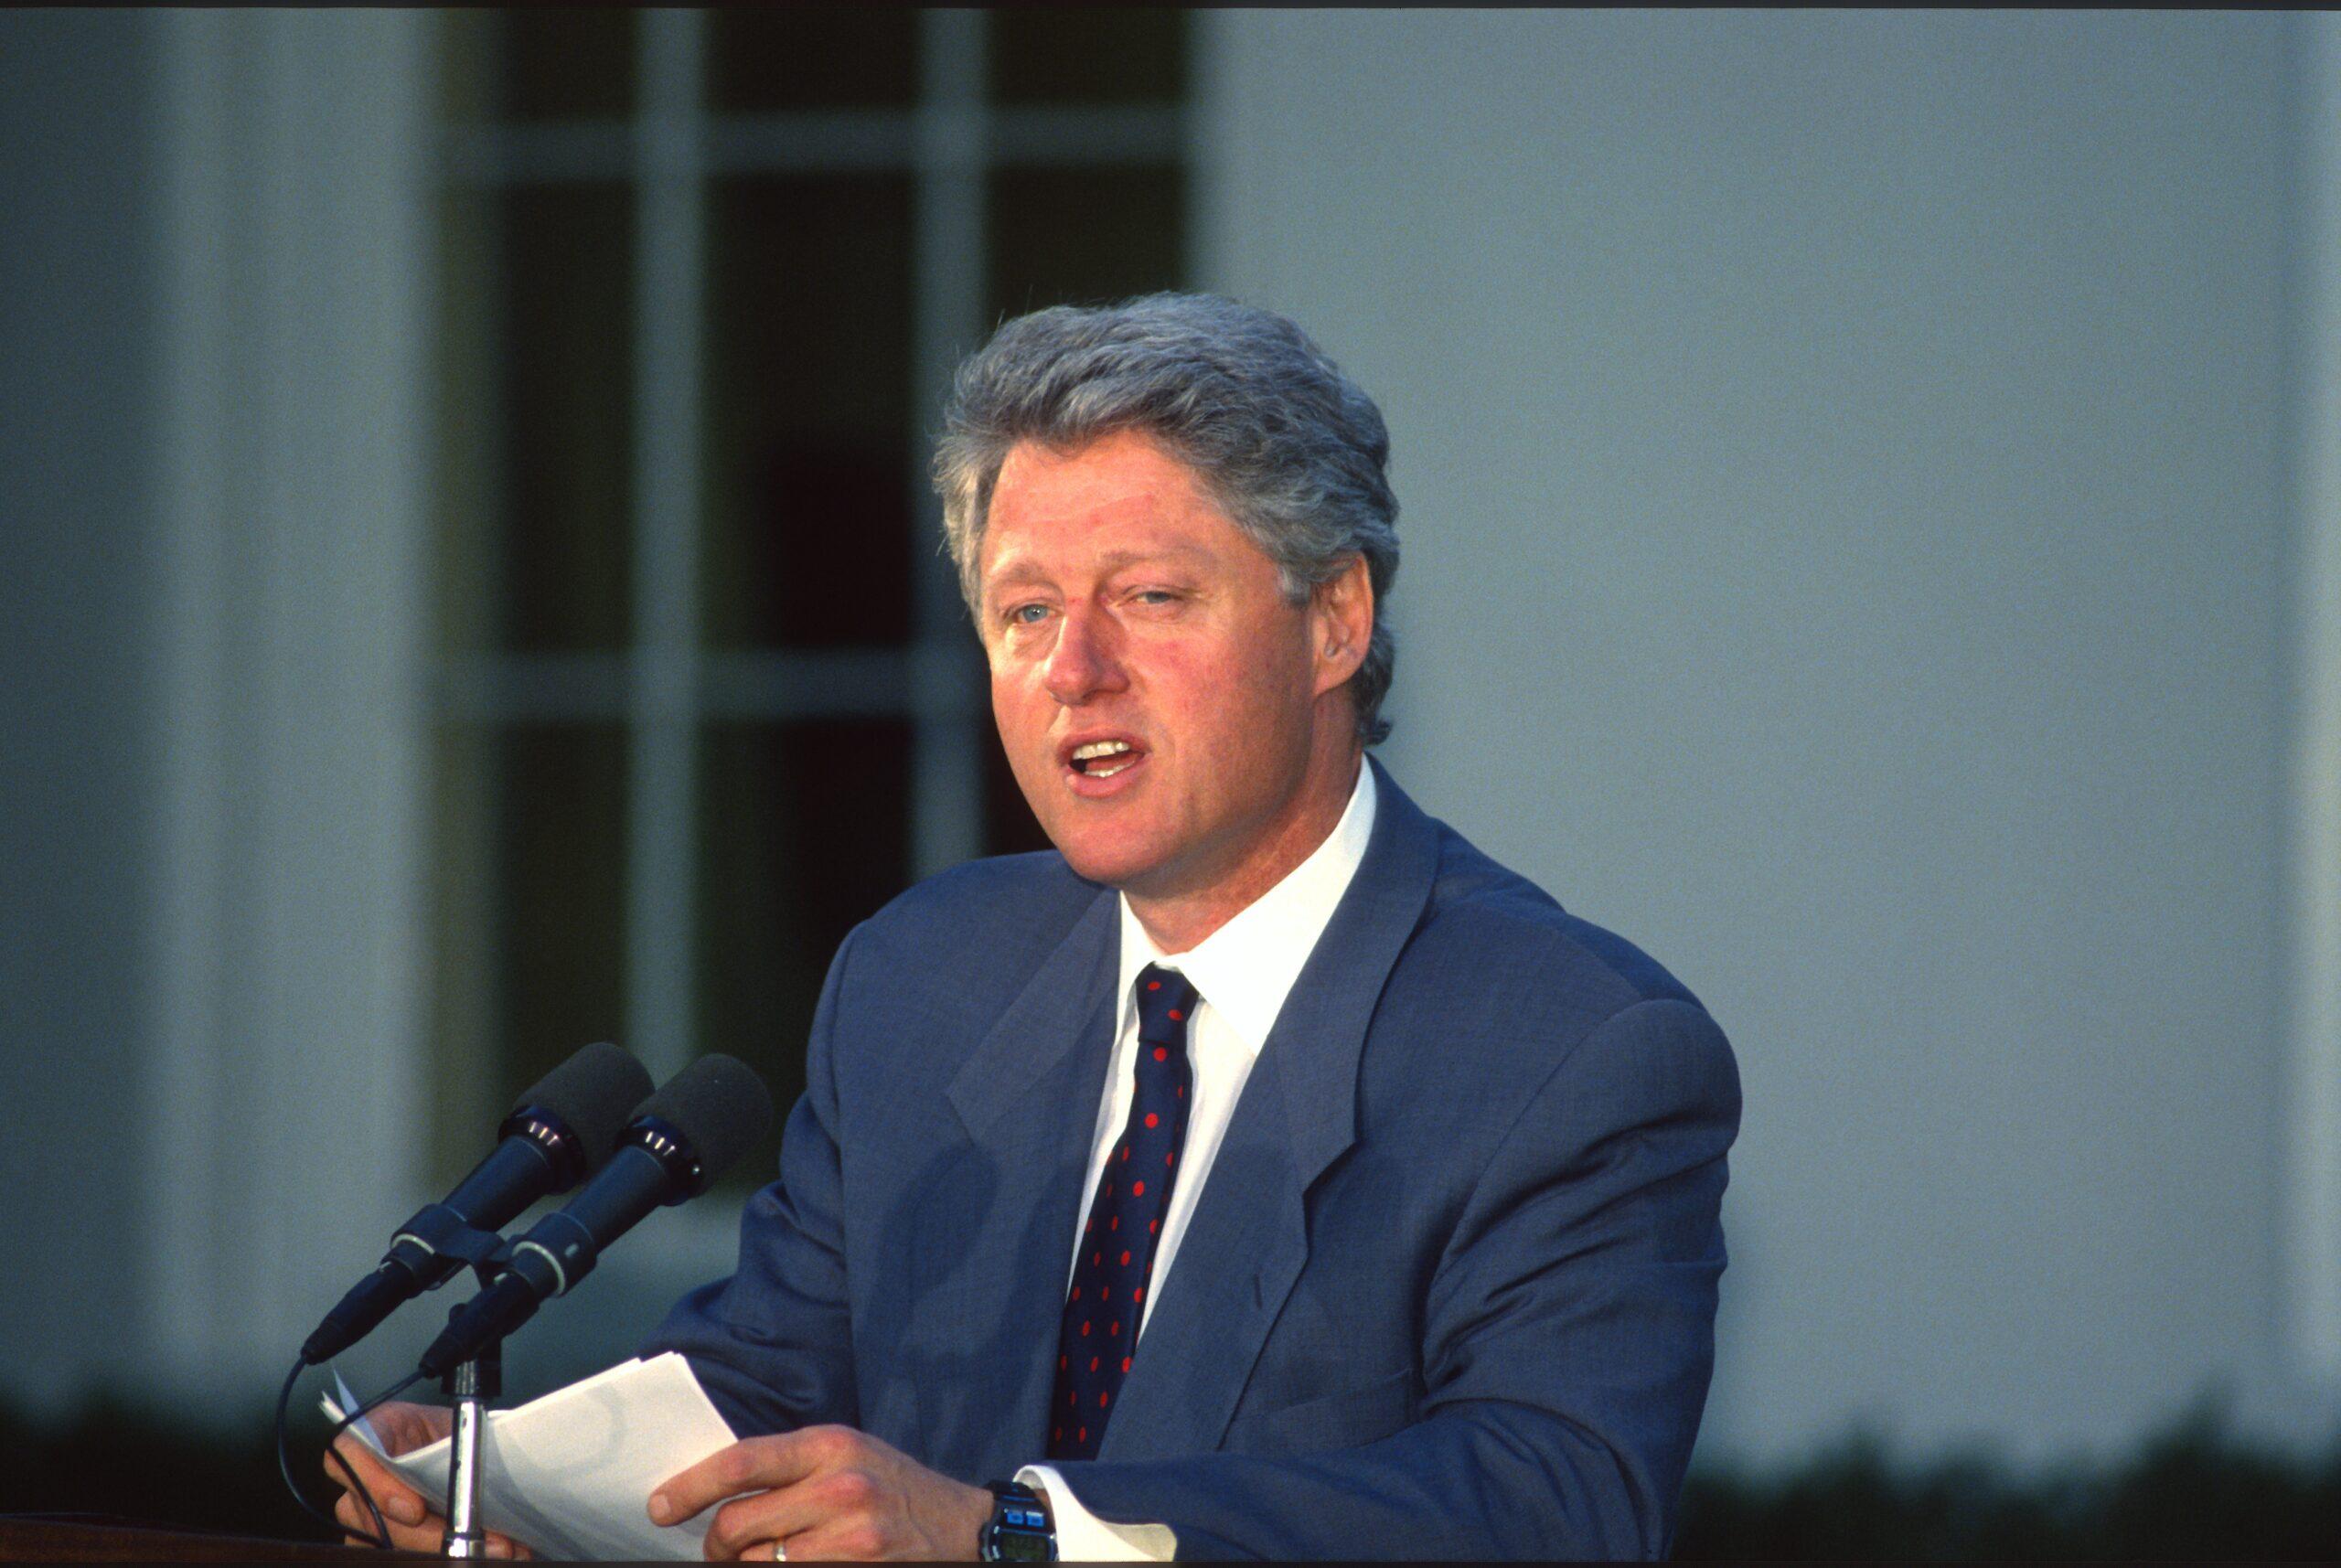 United States President Bill Clinton makes remarks as he names Chief Judge of the United States Court of Appeals for the First Circuit, Stephen G. Breyer, as Associate Justice of the US Supreme Court to replace the retiring Justice Harry Blackmun in a ceremony in the Rose Garden of the White House in Washington, DC on May 13, 1994.